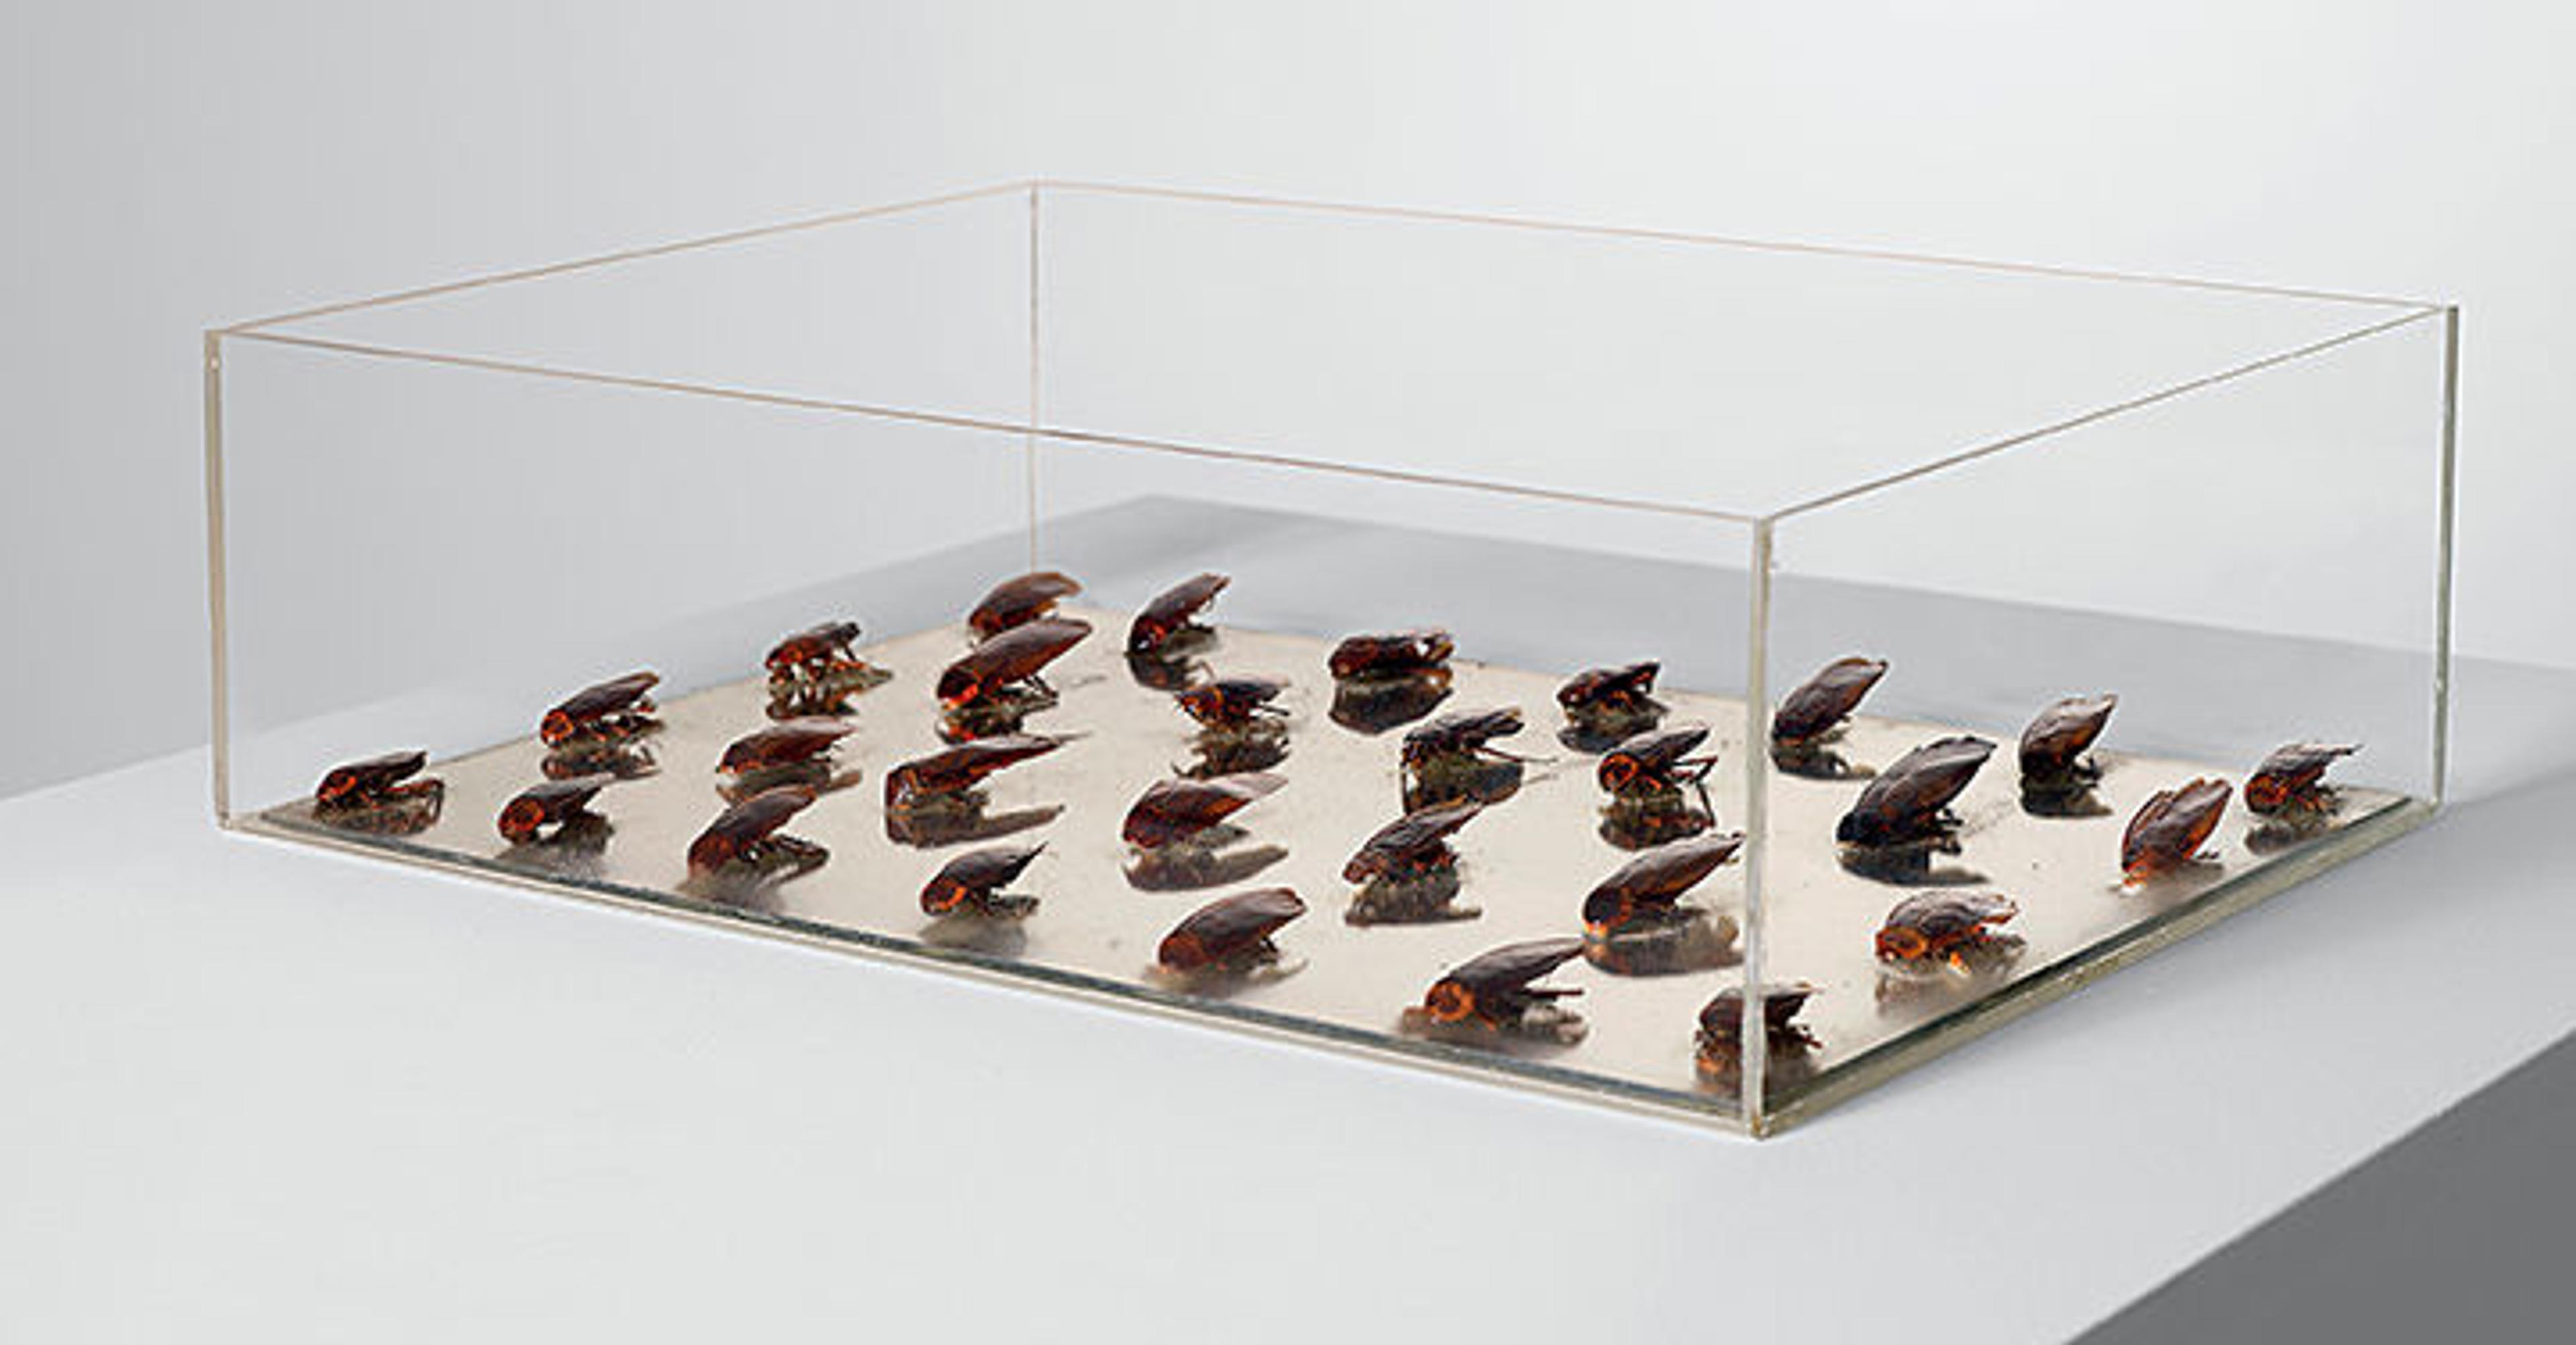 Plexiglas box with large cockroaches neatly aligned in a grid.